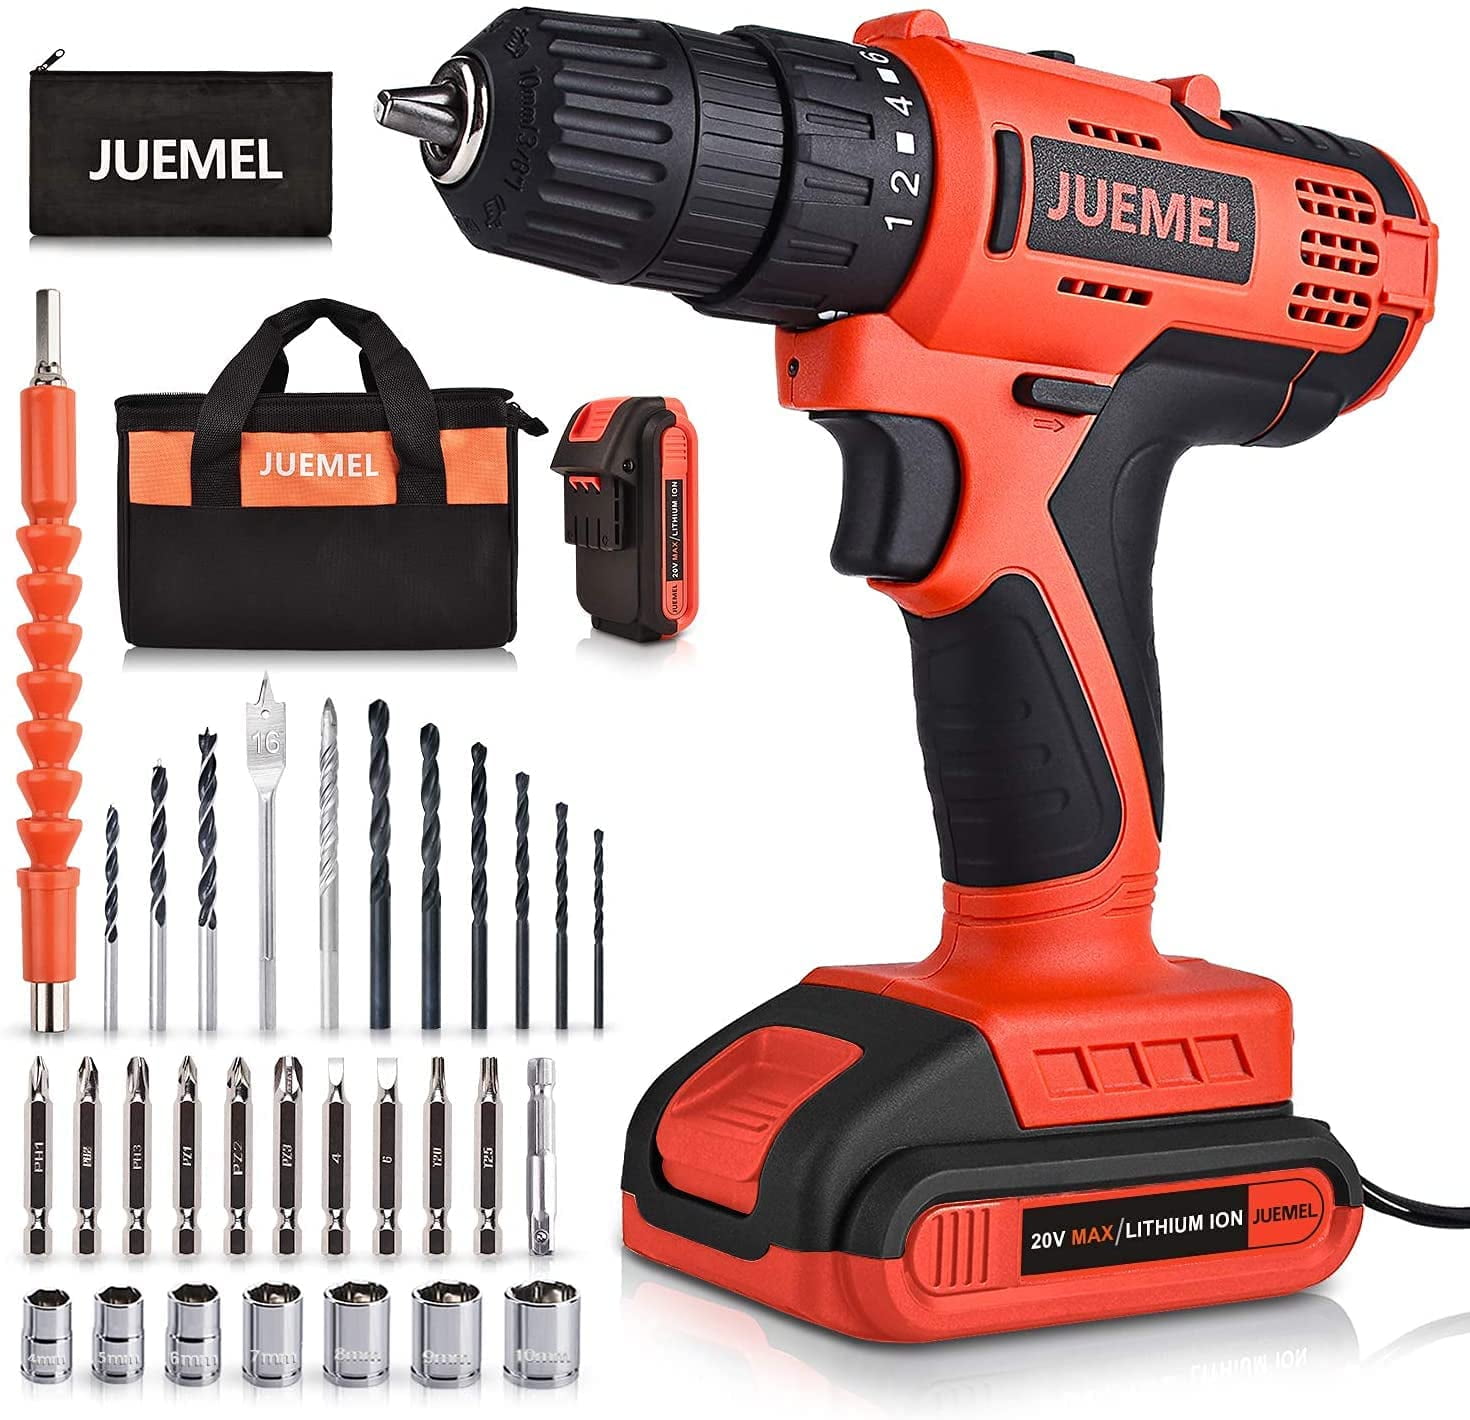 20-Volt Drill 2 Speed Electric Cordless Drill Driver with Bits Set & Battery 